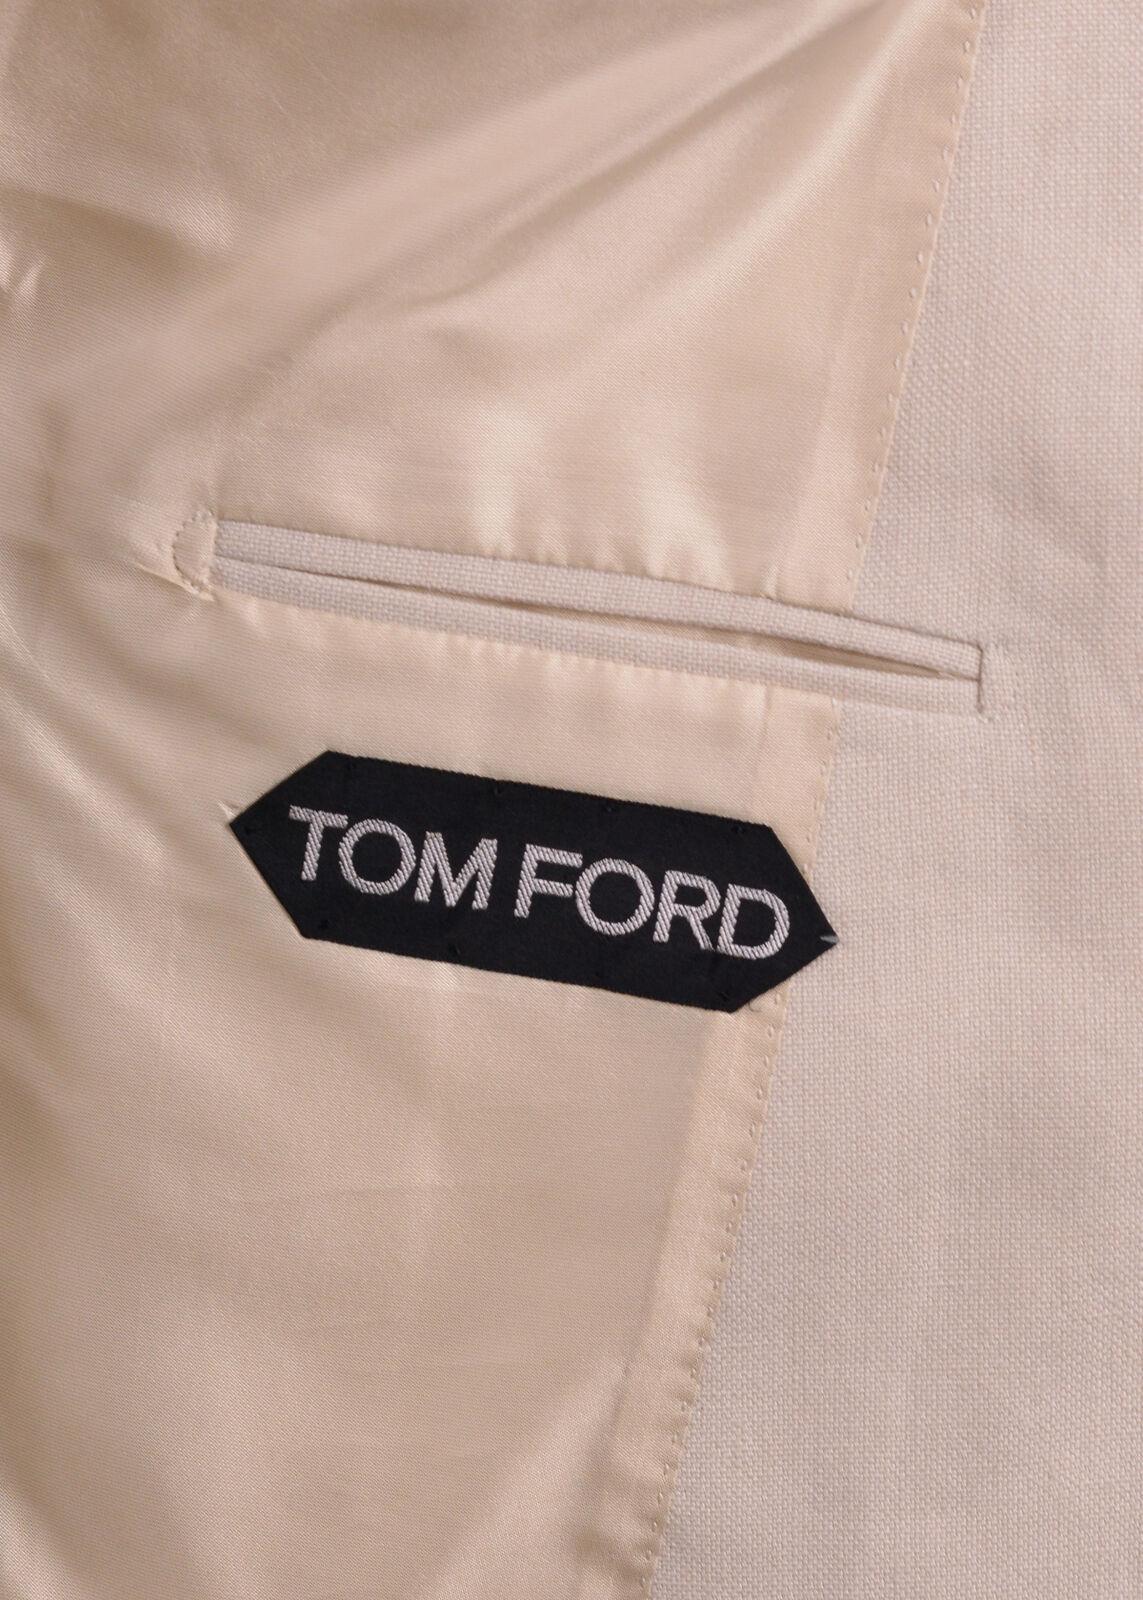 Tom Ford Shelton Jacket Blazer. This Shelton jacket features a hand stitched signature button hole on a soft durable linen  textile. Pair with jeans or black slacks for a sophistcated everyday look.

Tom Ford Shelton Jacket Blazer
100% Linen
Peak